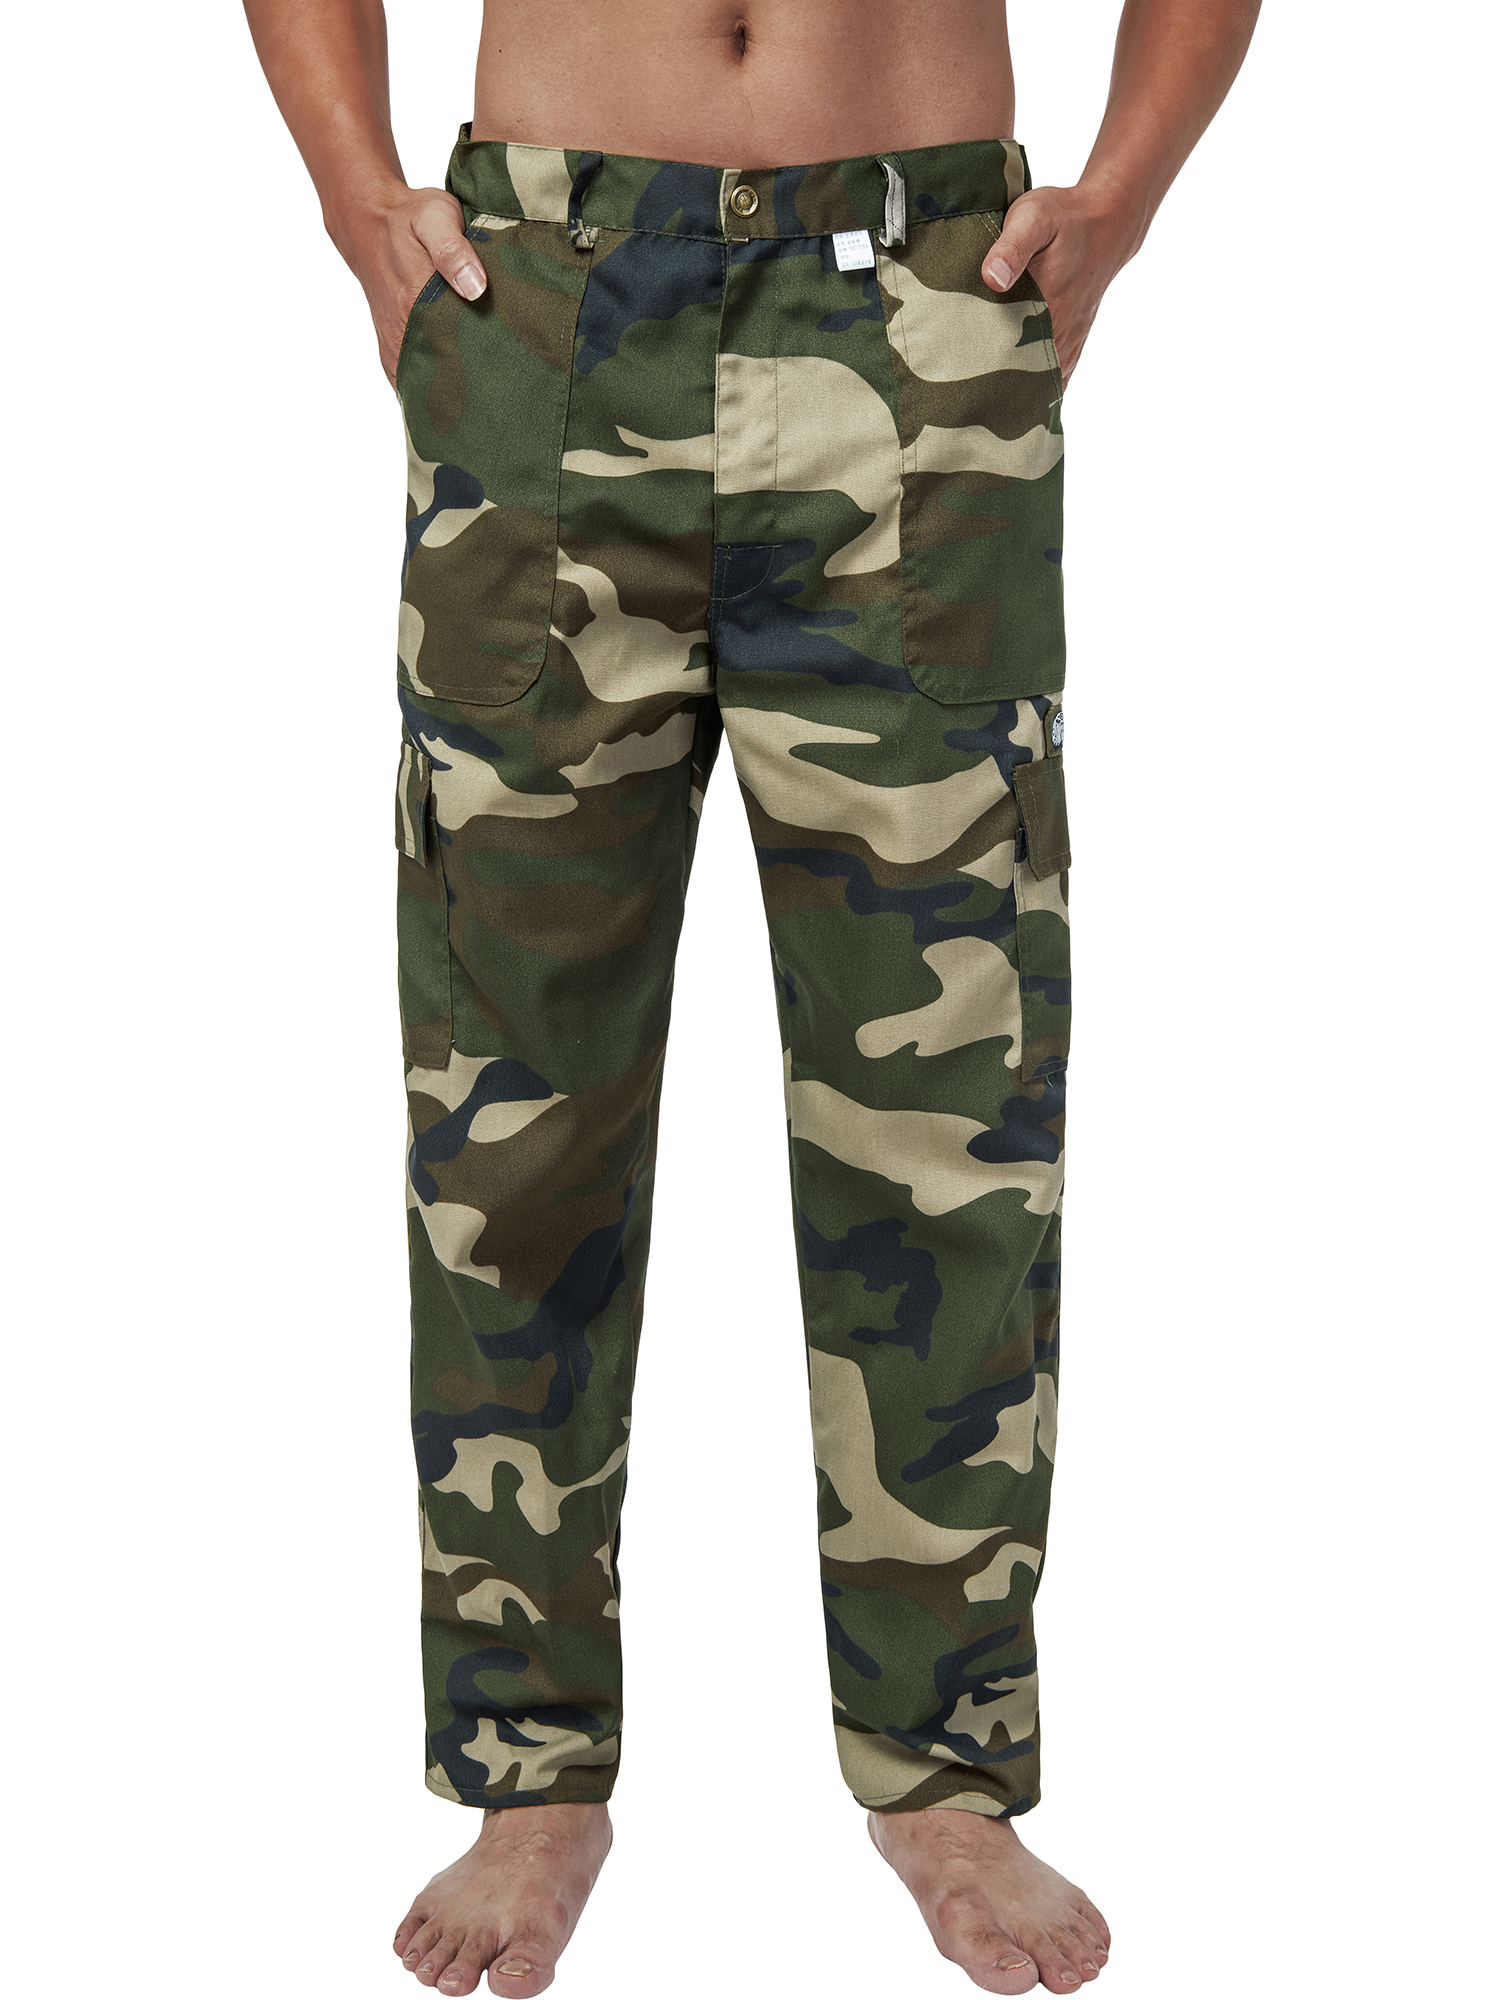 ARMY CARGO CAMOFLAGE COMBAT MILITARY TROUSERS//PANTS 30/"-56/" WAIST 32/" /& 30/" LEG